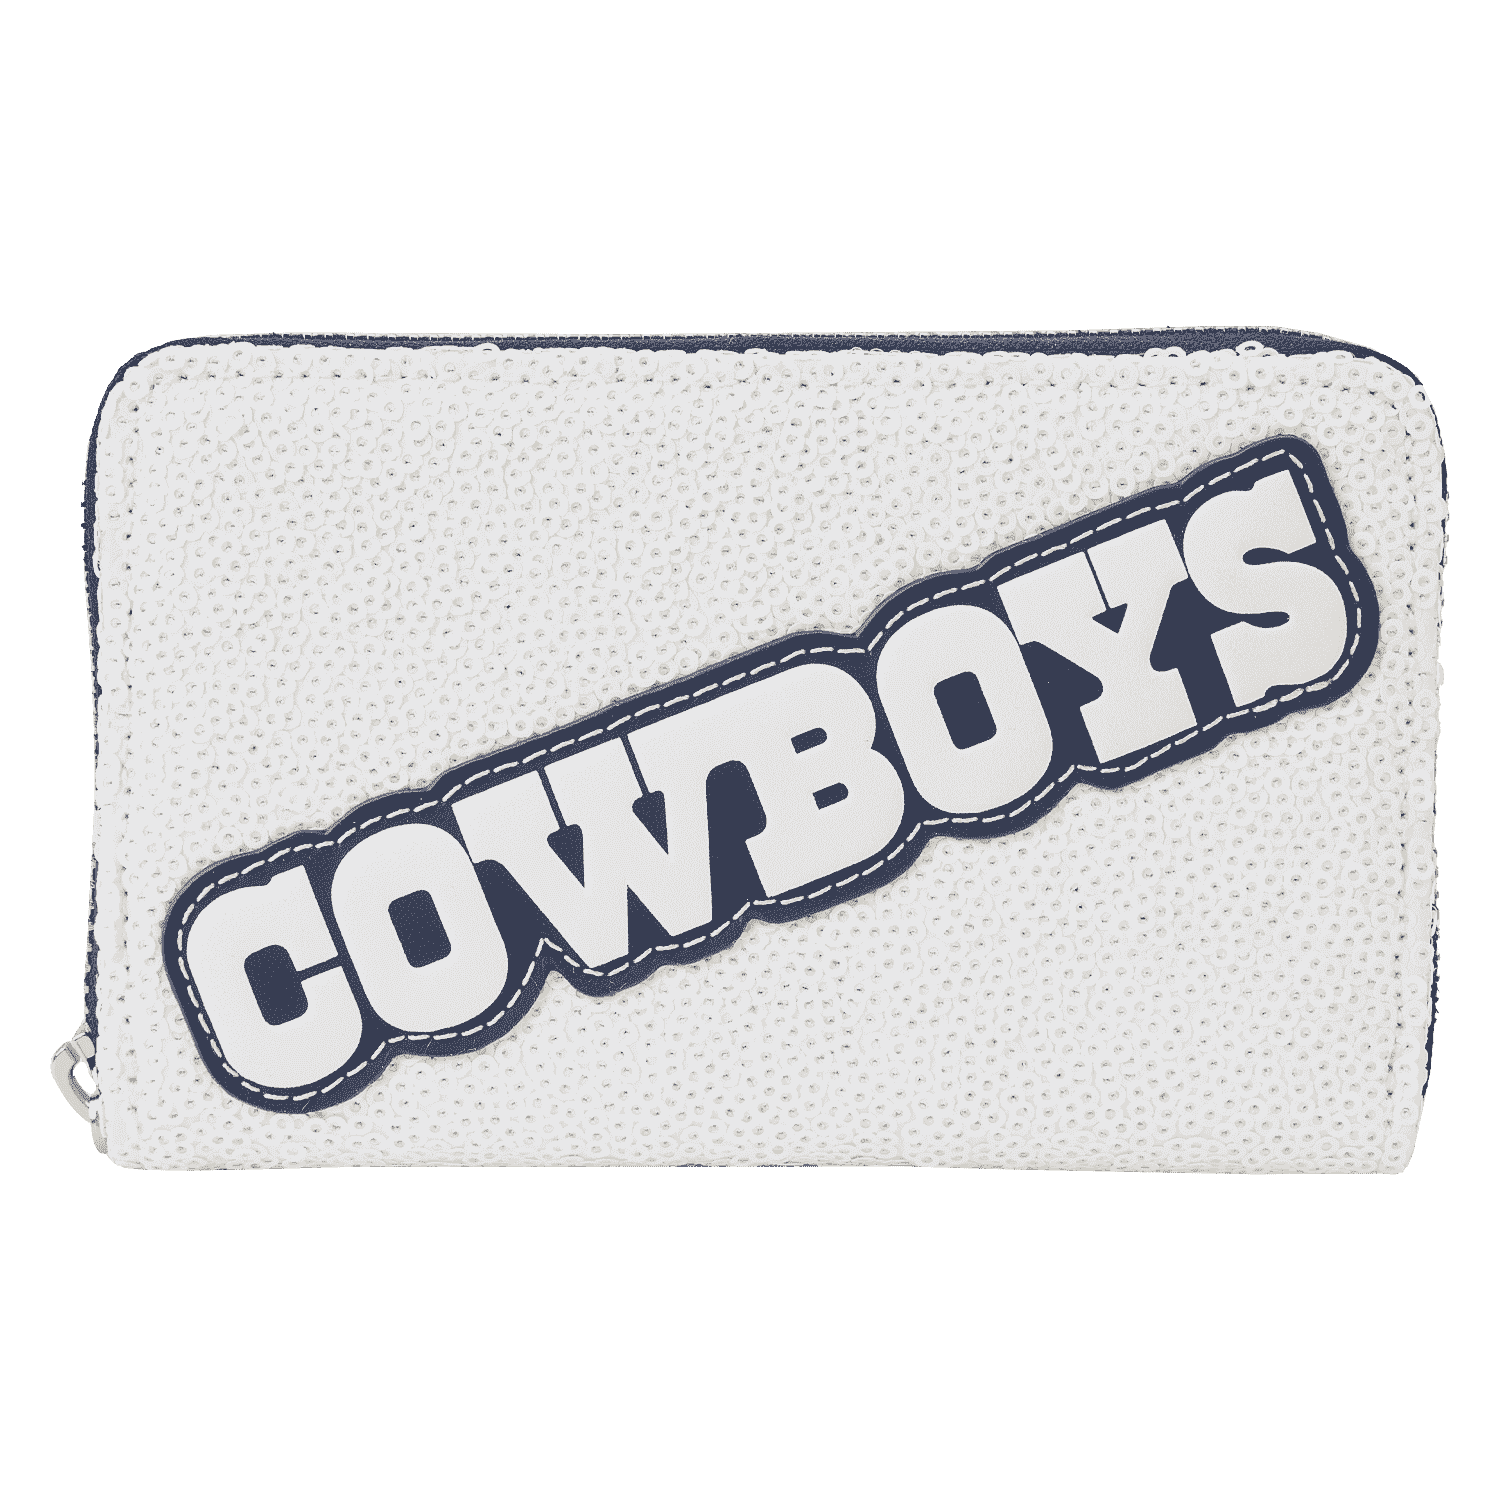 Buy NFL Dallas Cowboys Sequin Zip Around Wallet at Loungefly.